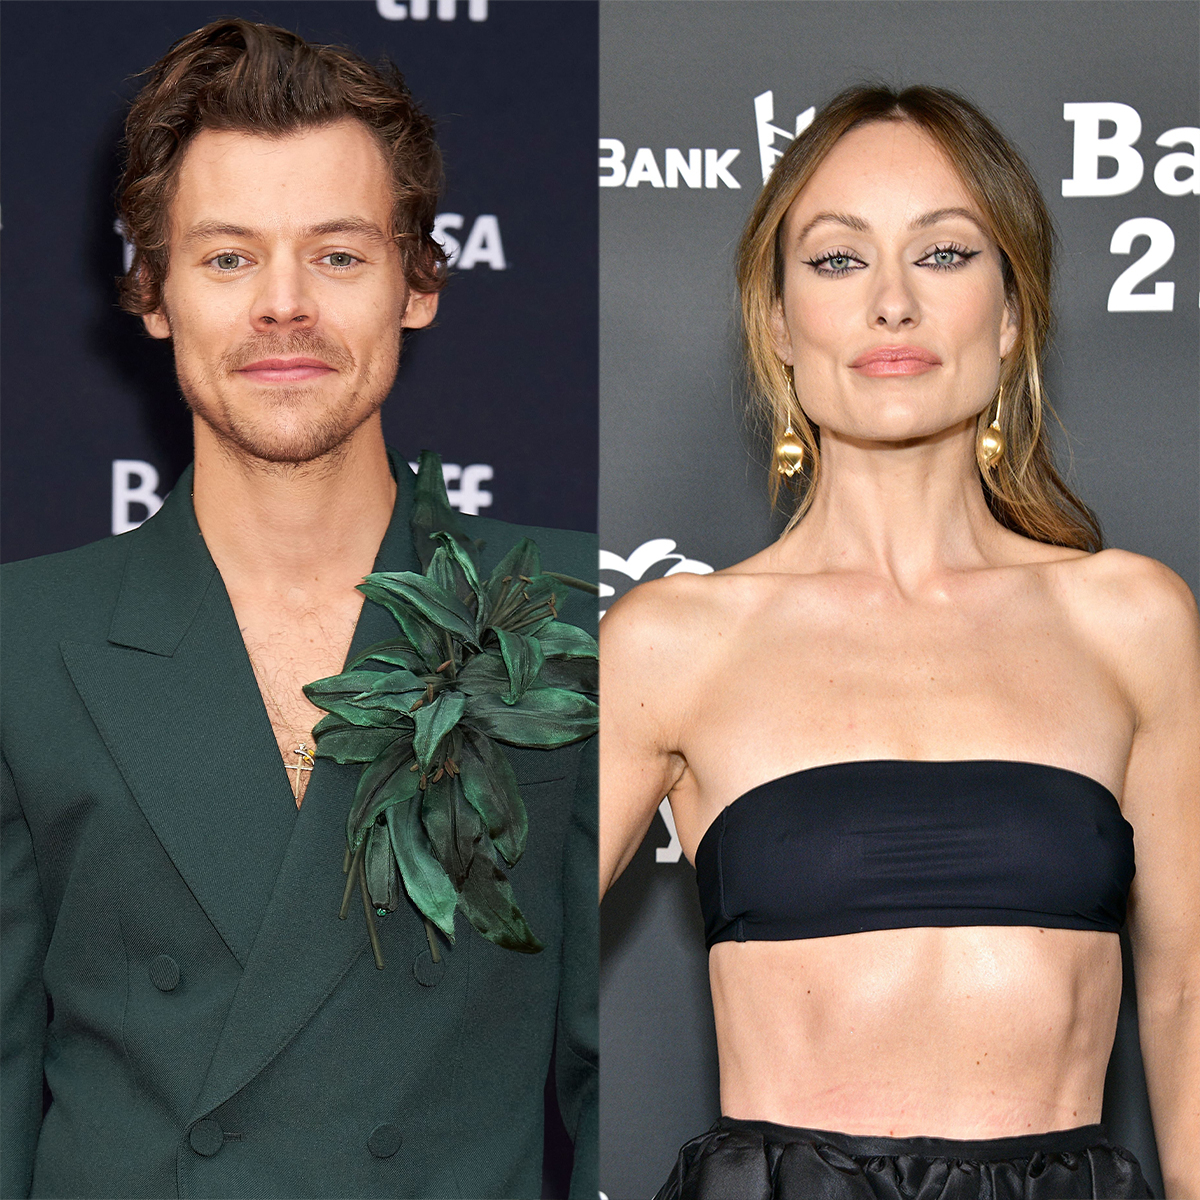 Harry Styles and Olivia Wilde Break Up After About 2 Years of Dating